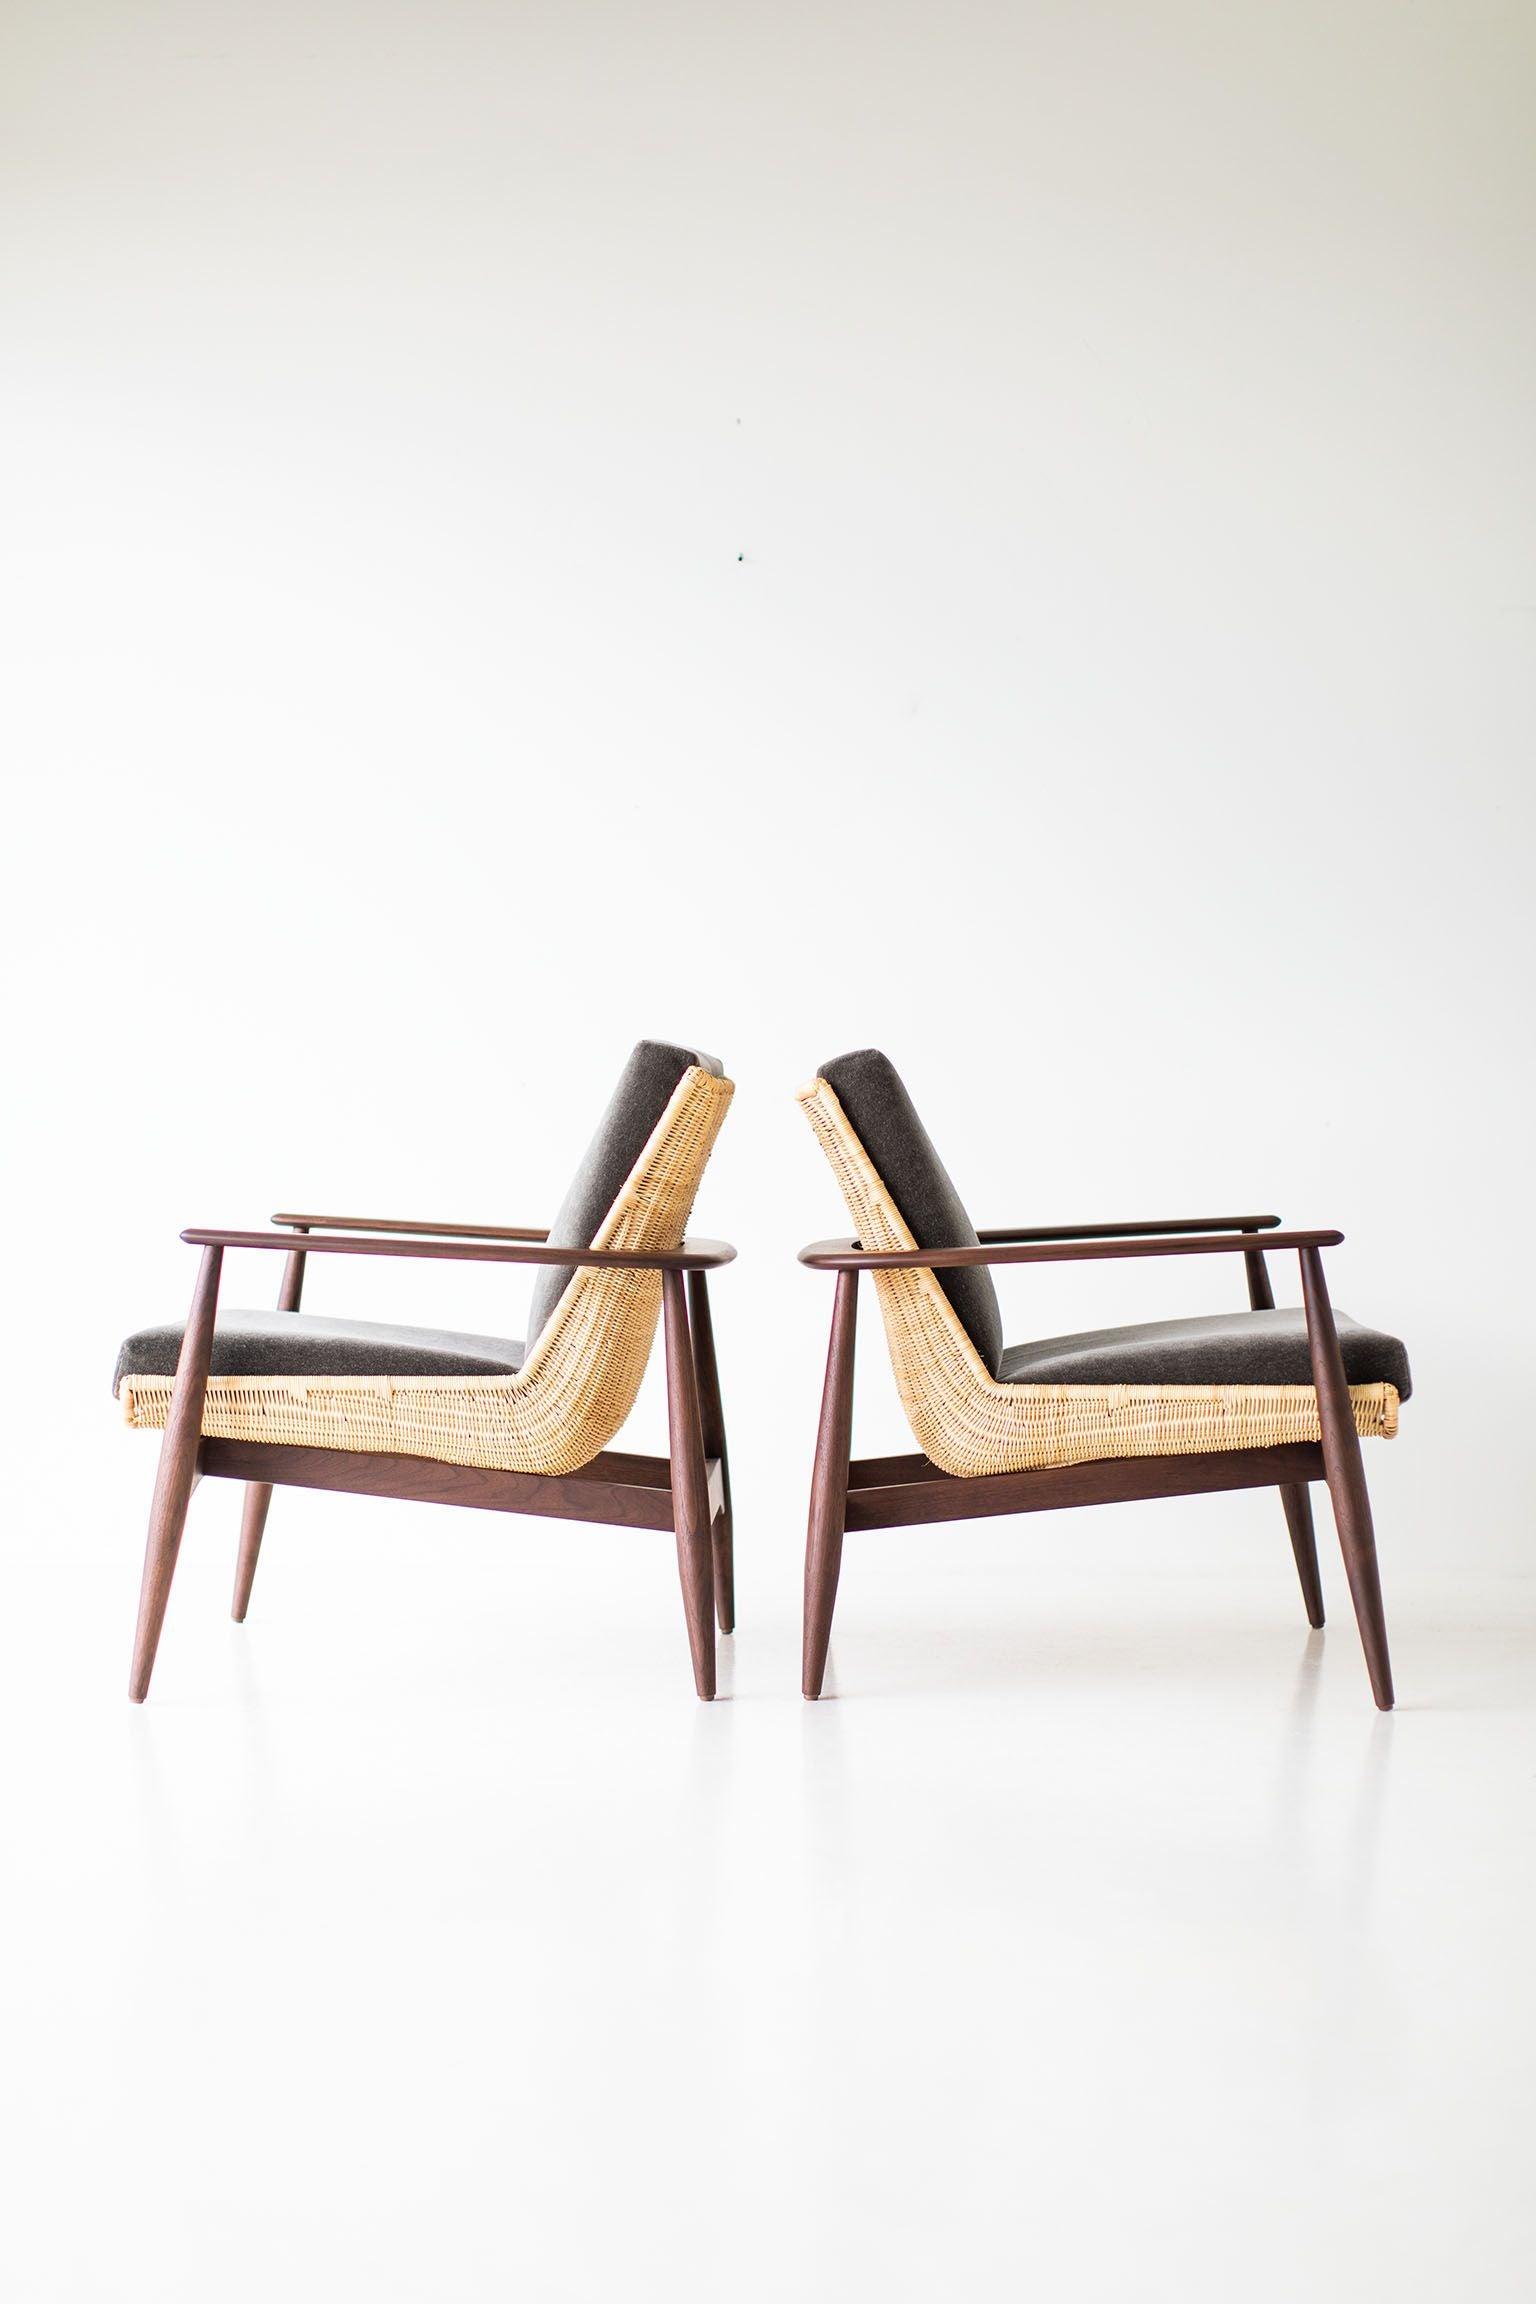 Lawrence-Peabody-Wicker-Lounge-Chairs-03